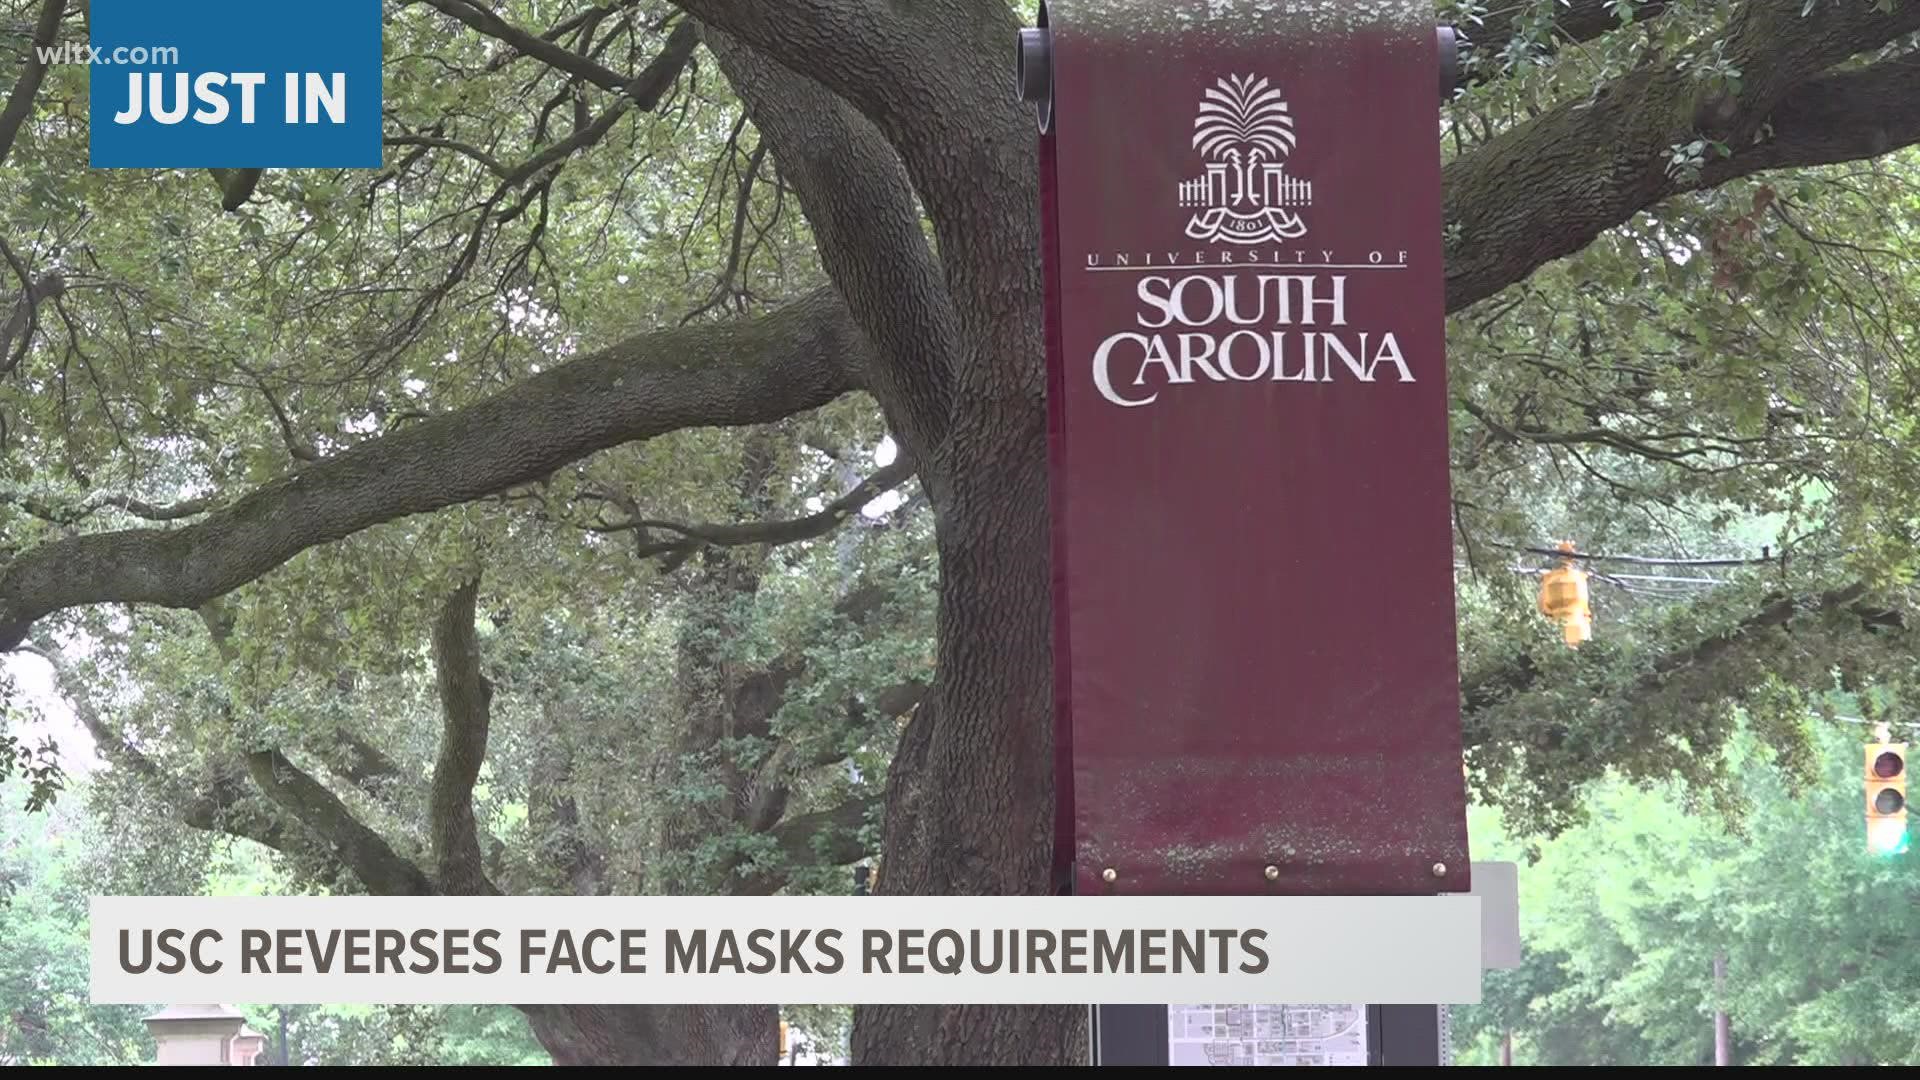 The University of South Carolina won't require face masks after an attorney general opinion said they couldn't.